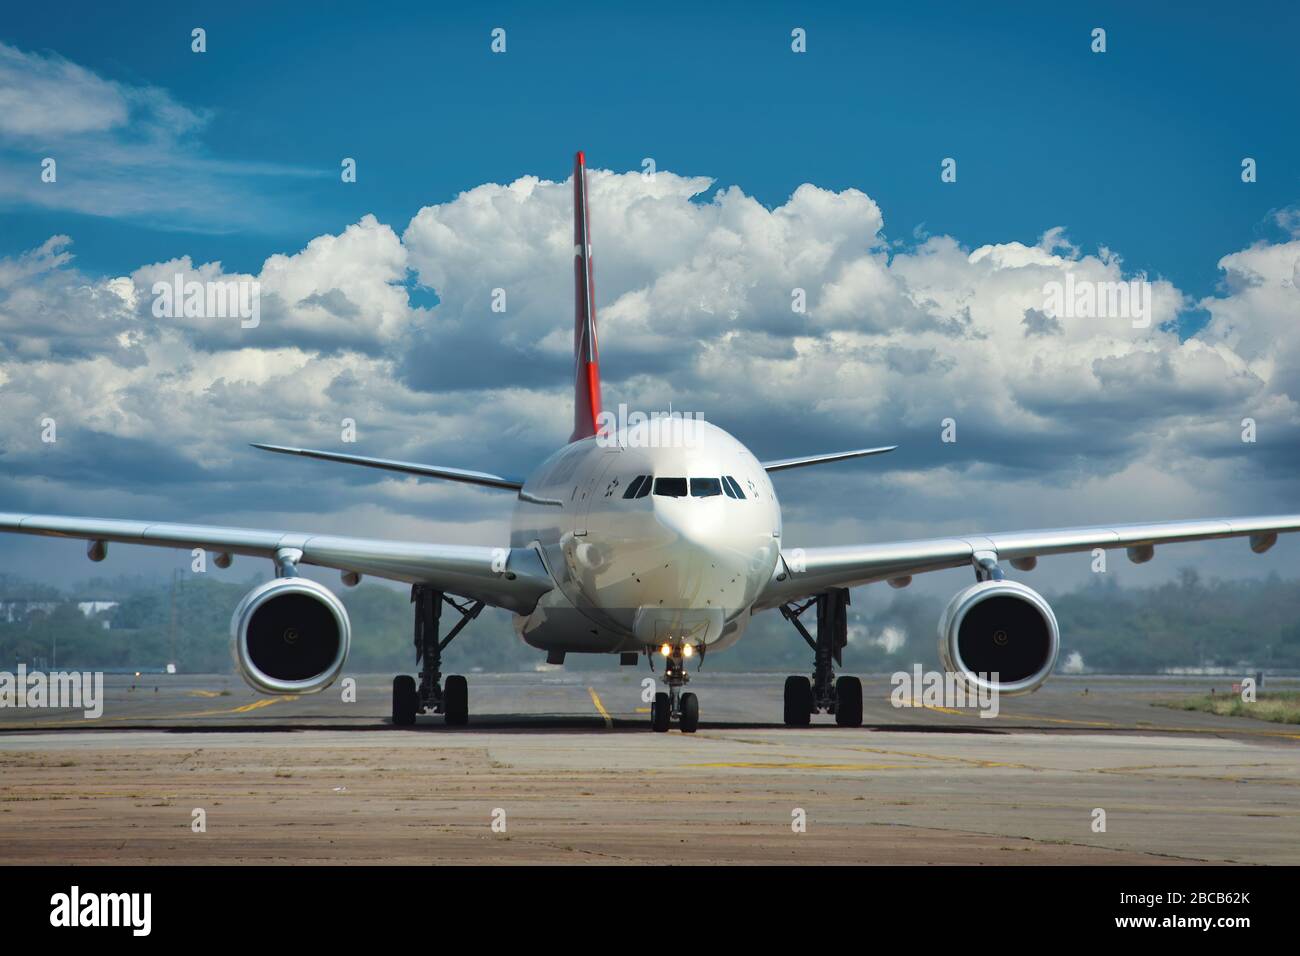 A commercial airliner wide body aircraft Stock Photo